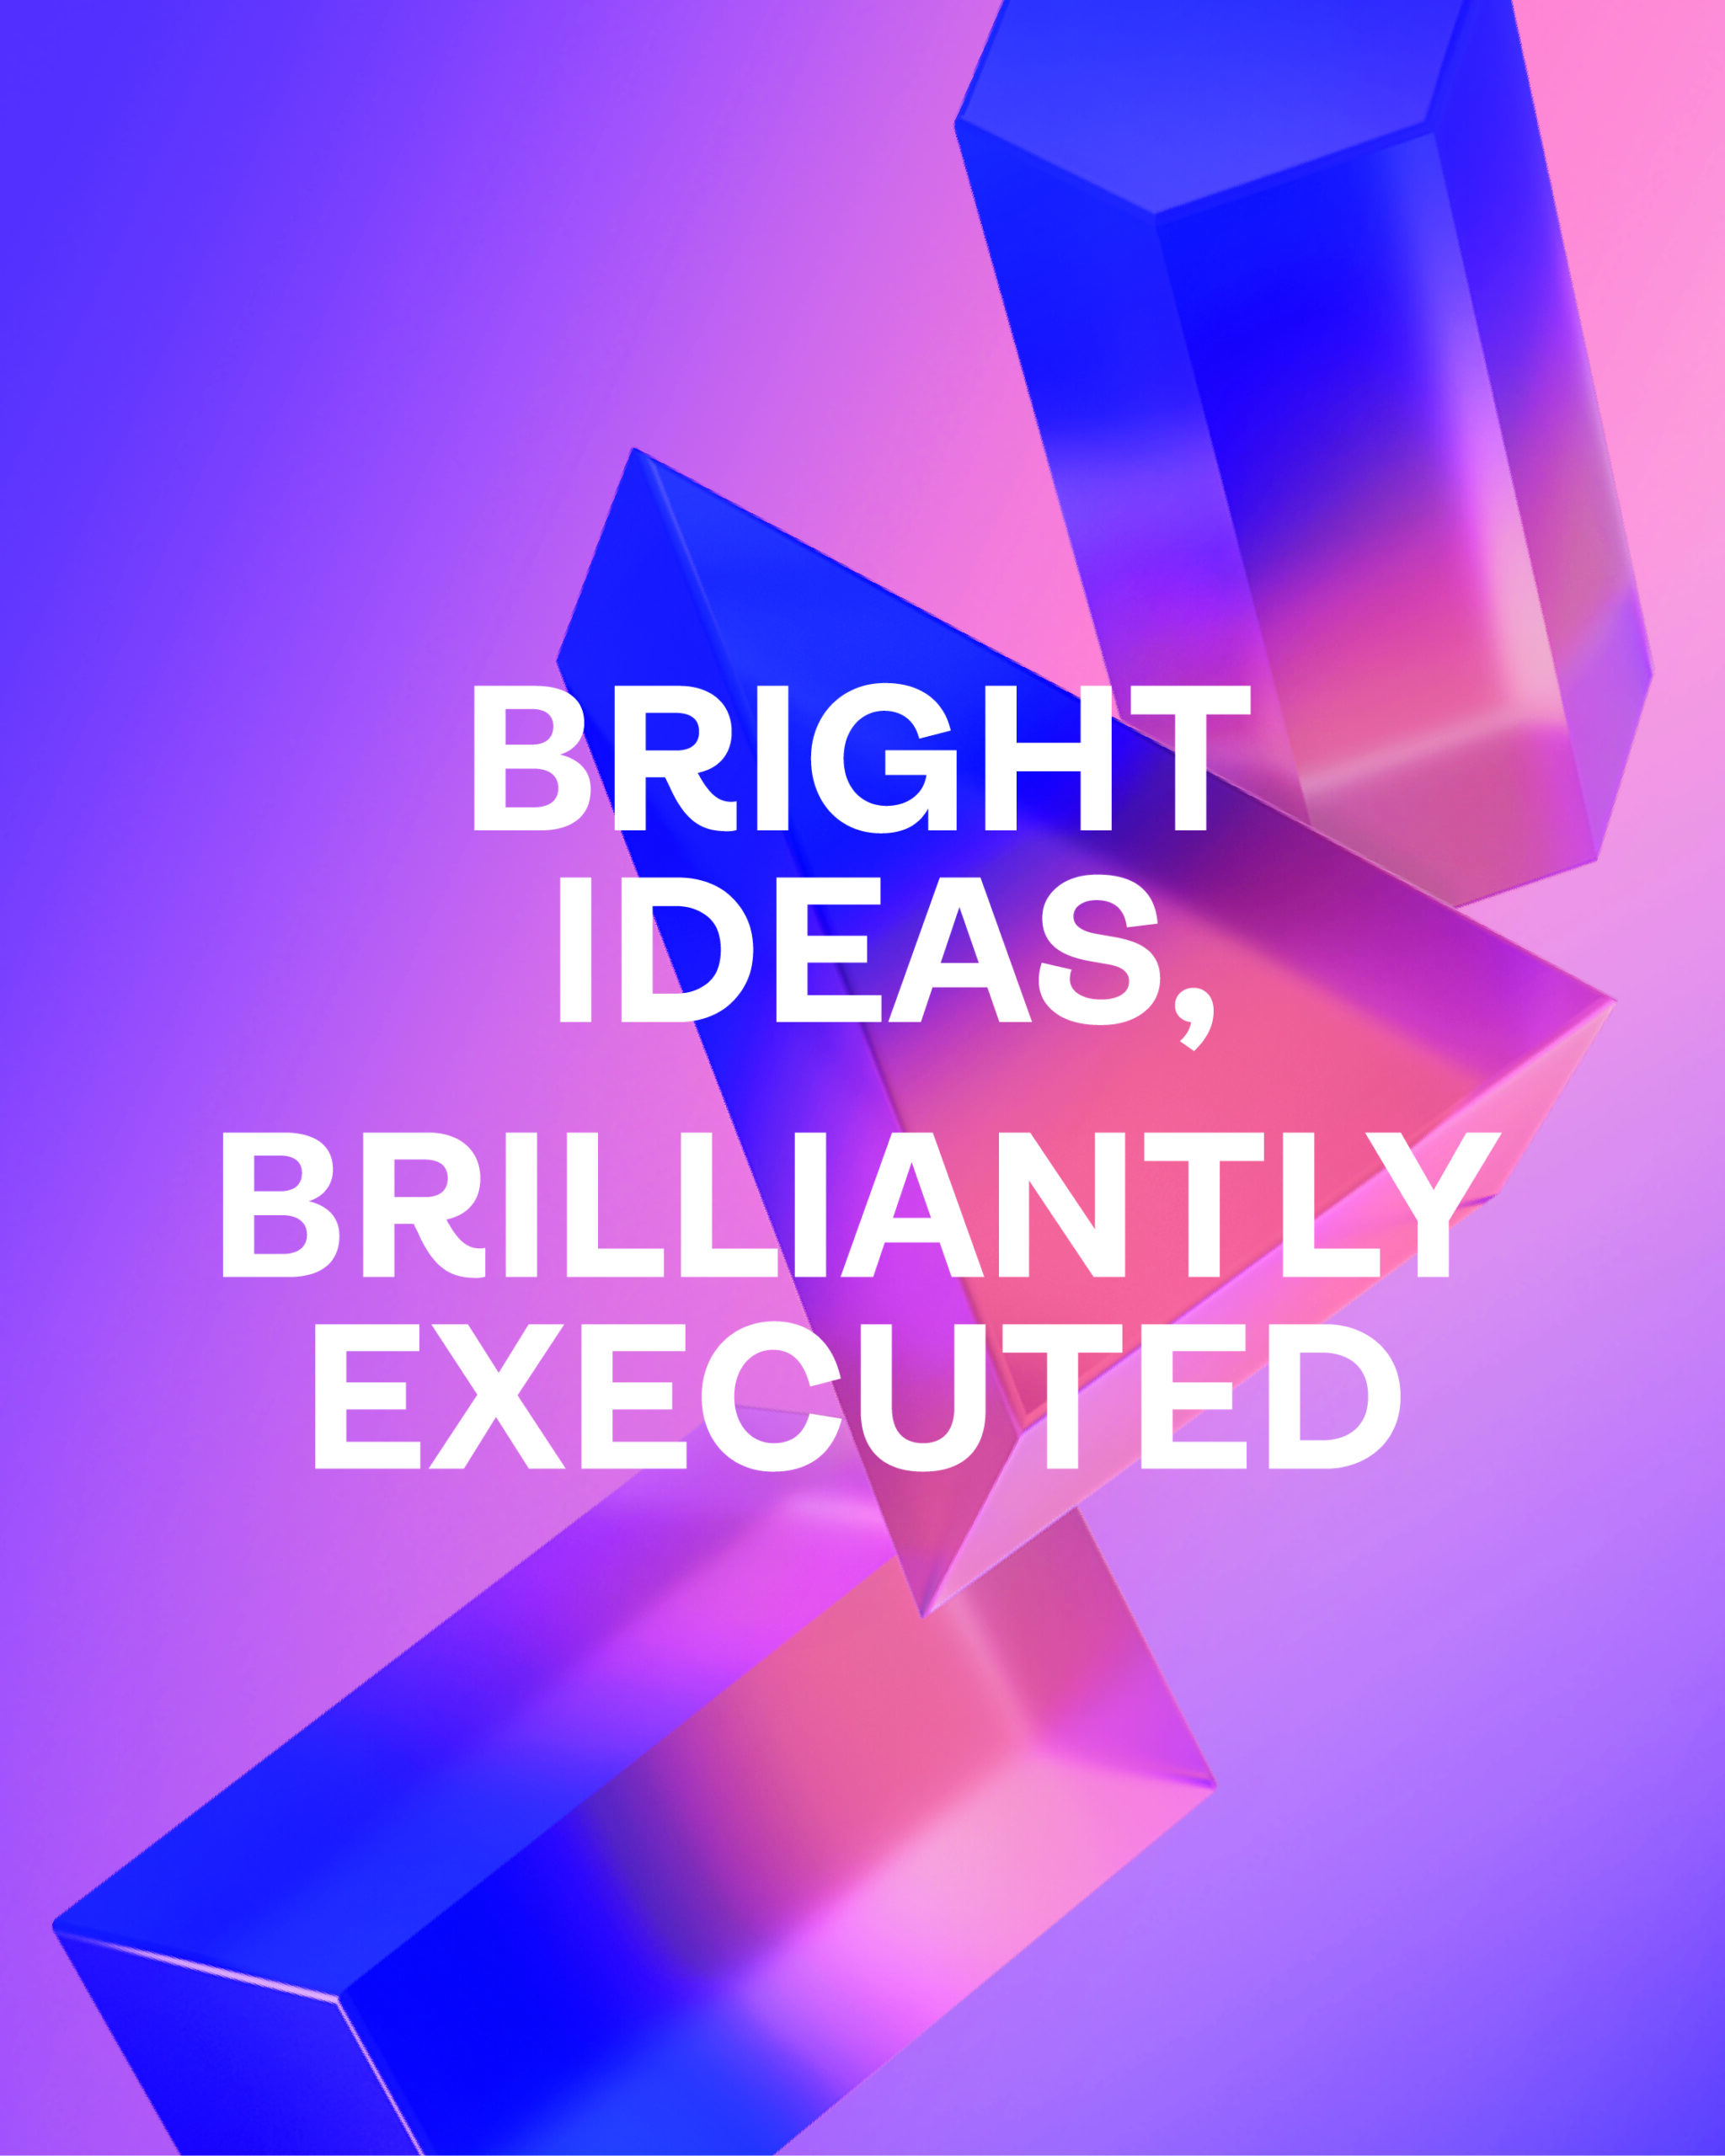 BRIGHT IDEAS BRILLIANTLY EXECUTED phase by BRANDED Agency.